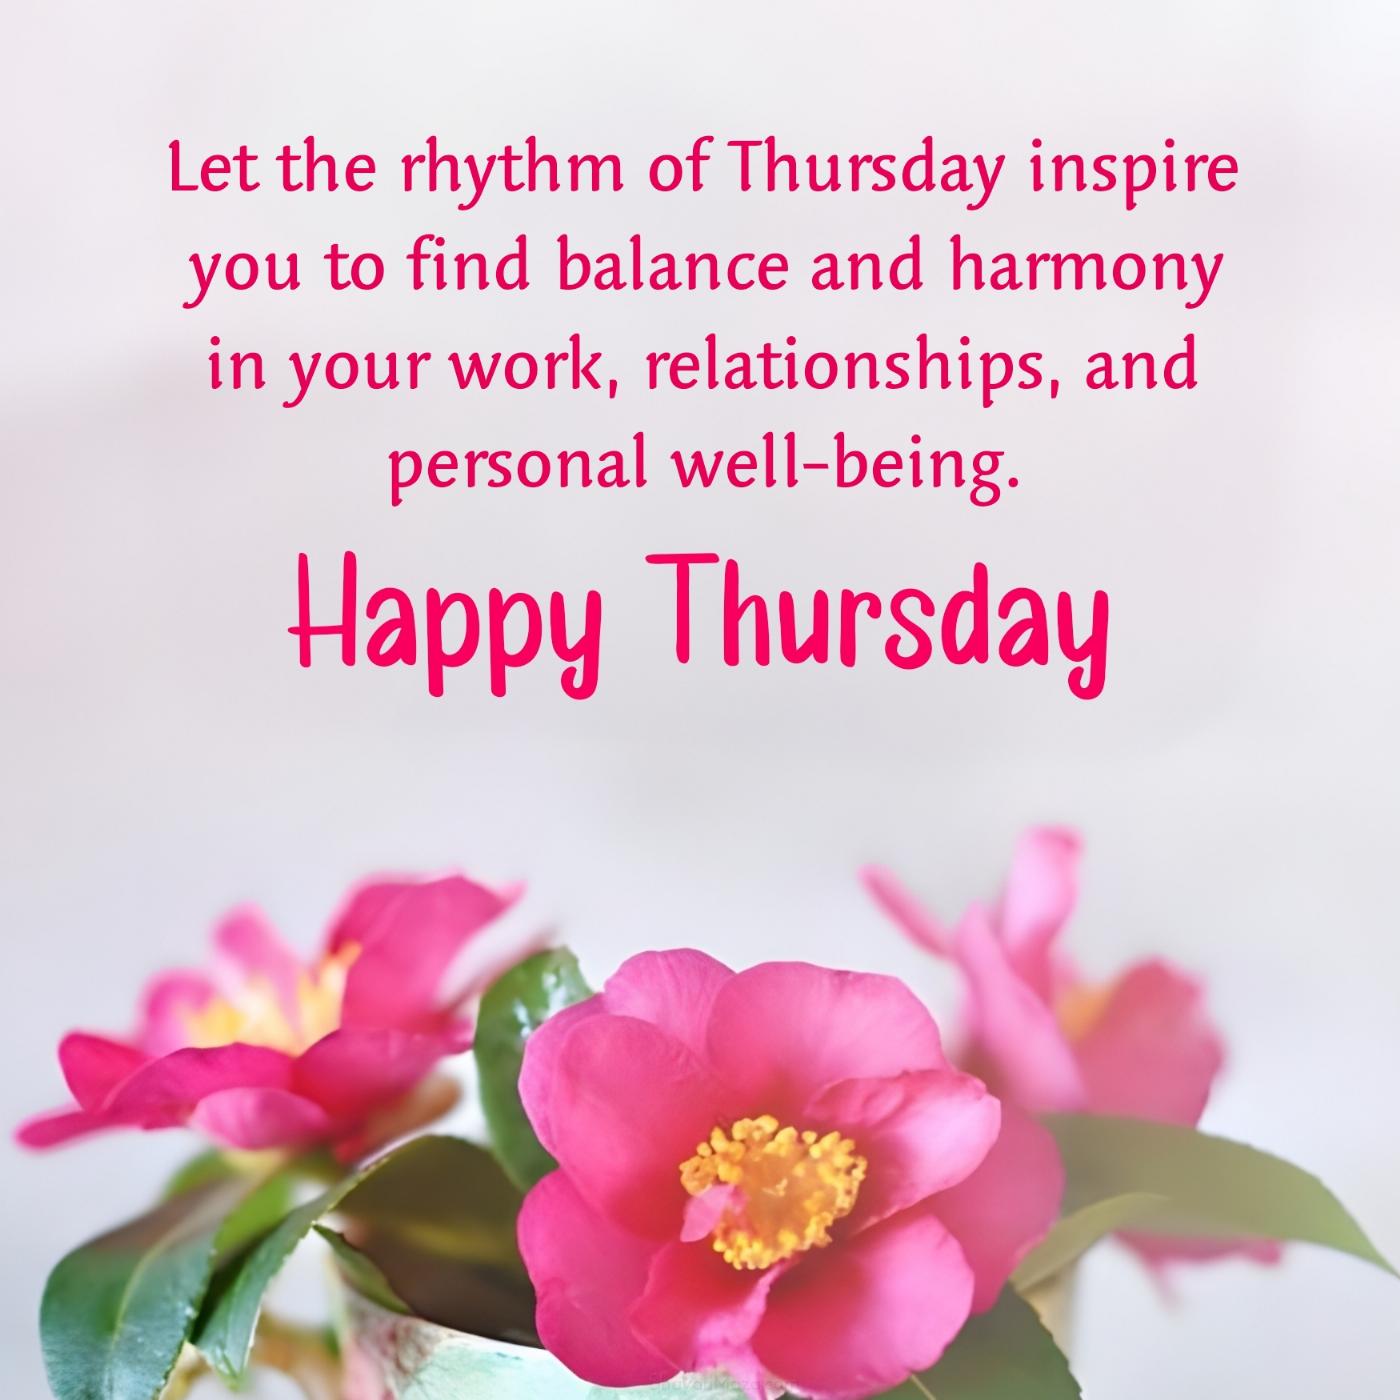 Let the rhythm of Thursday inspire you to find balance and harmony